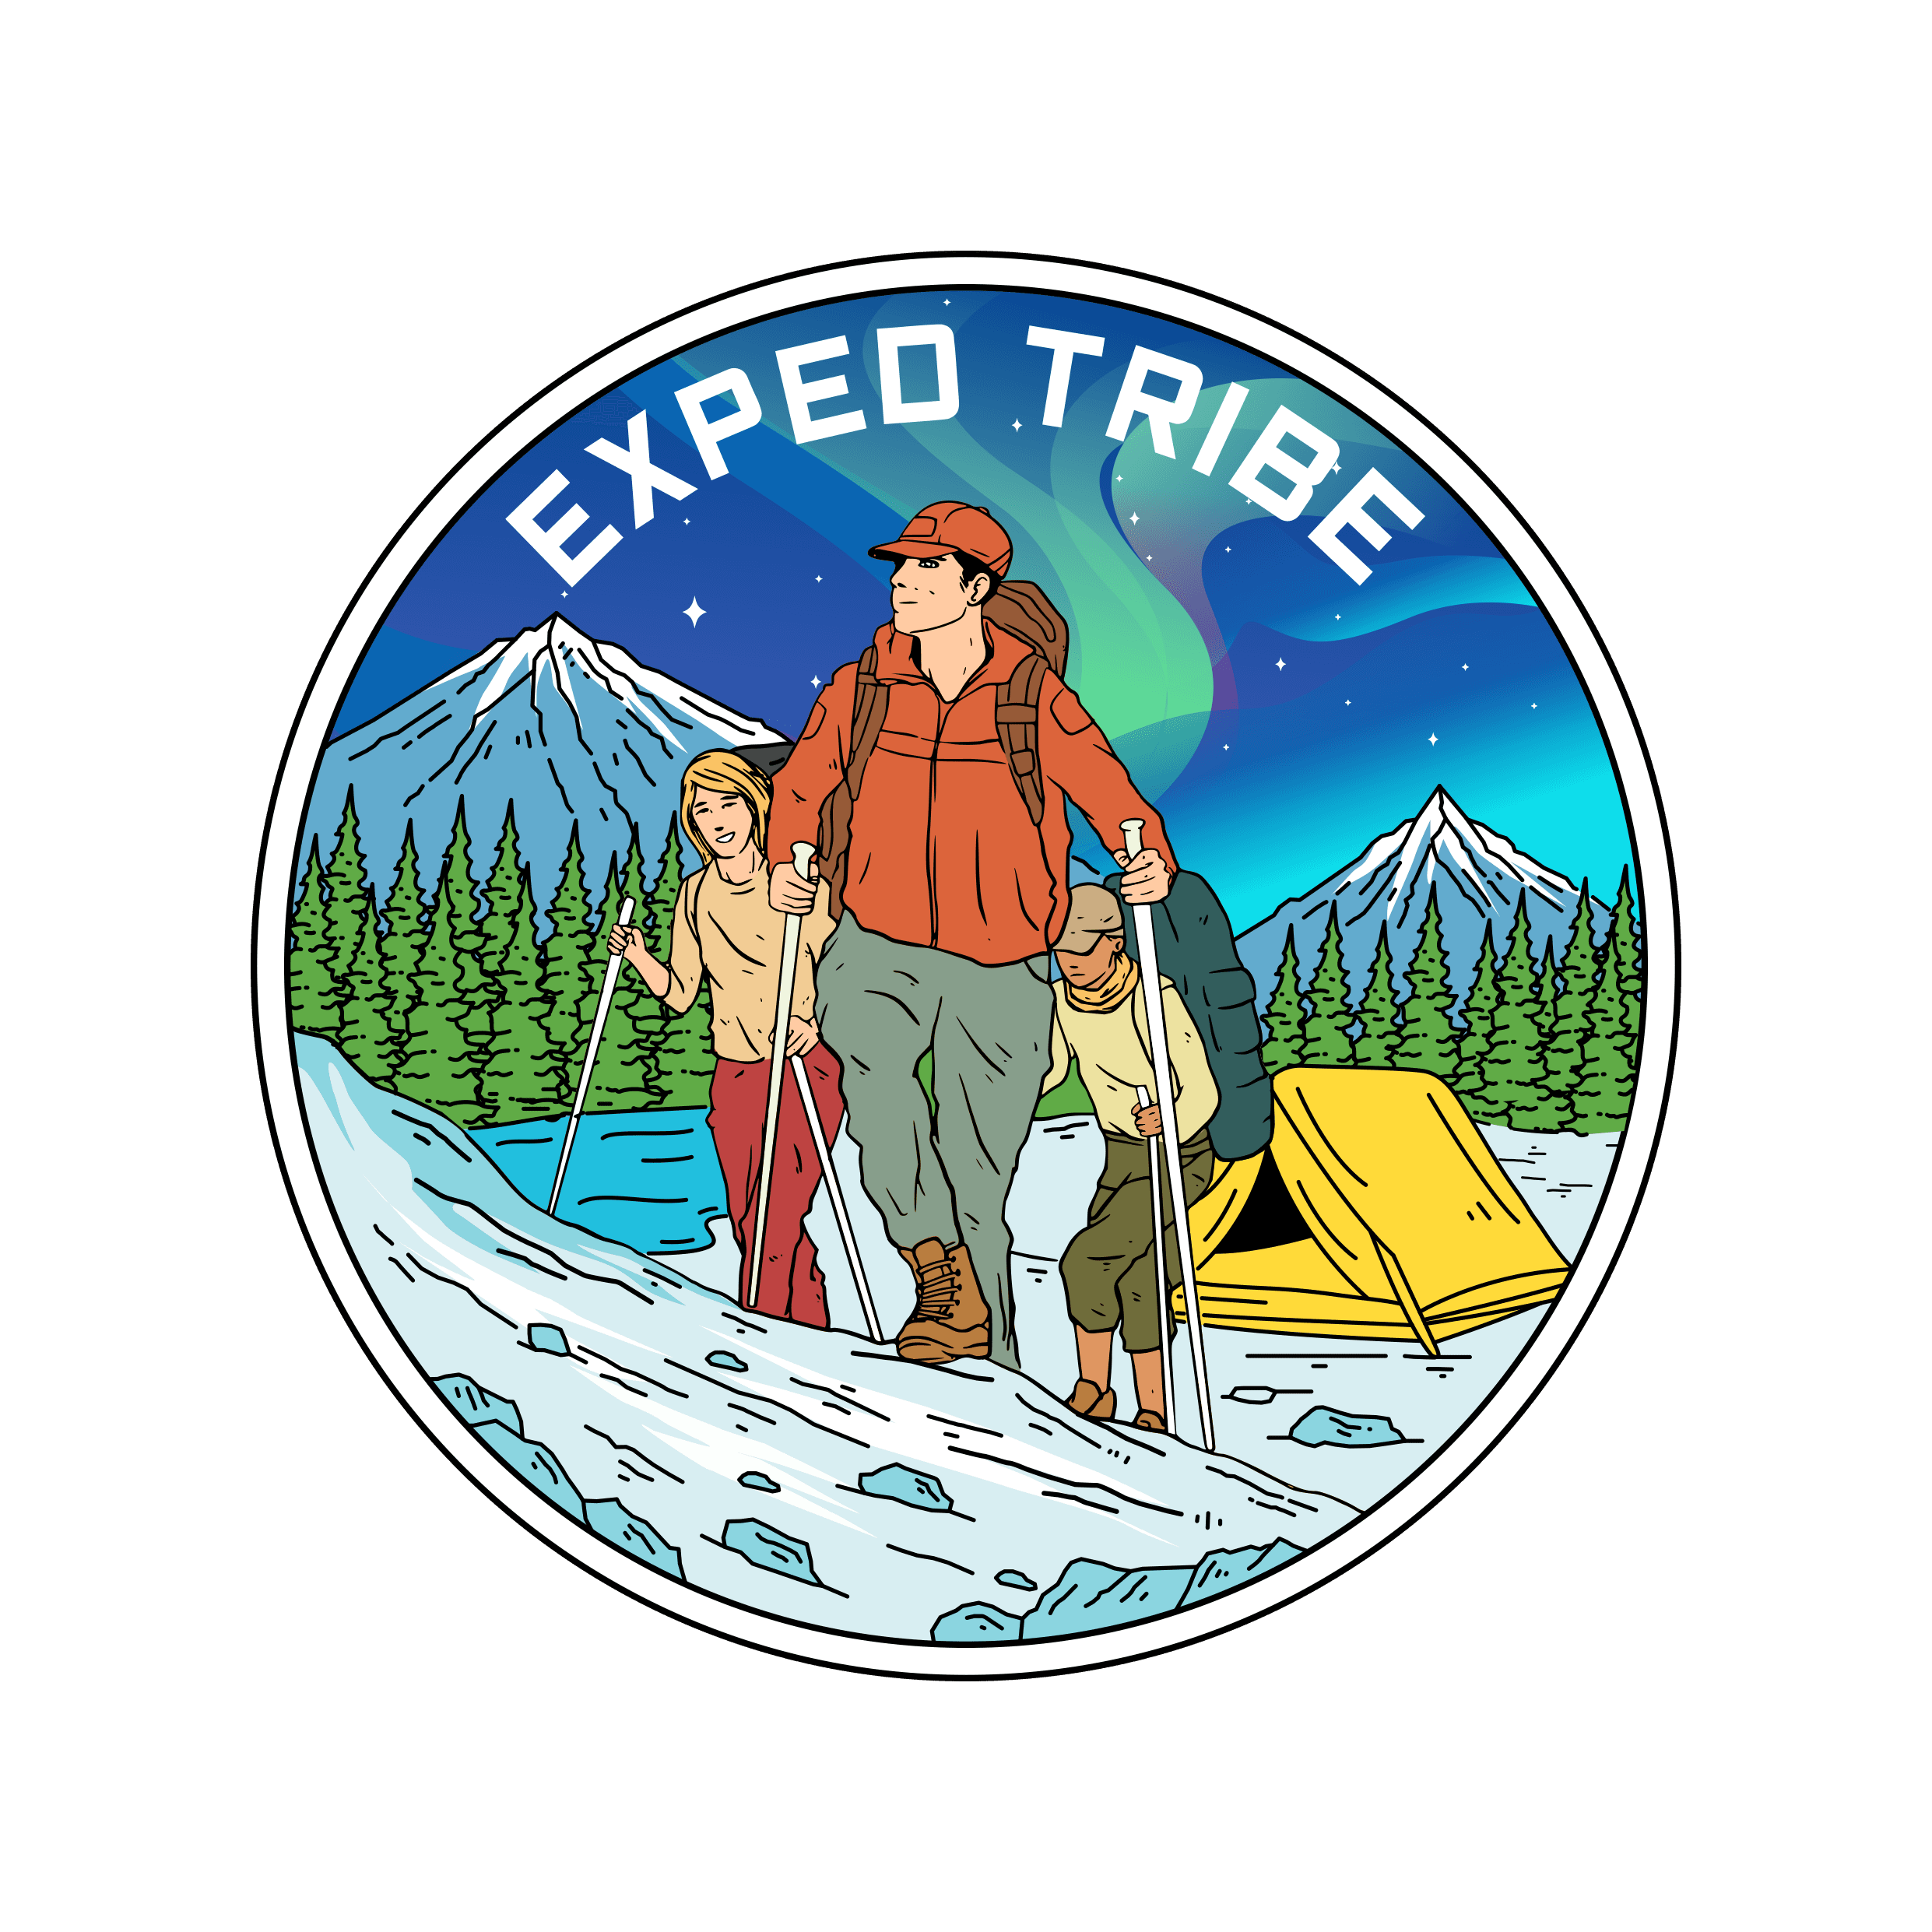 Exped Tribe